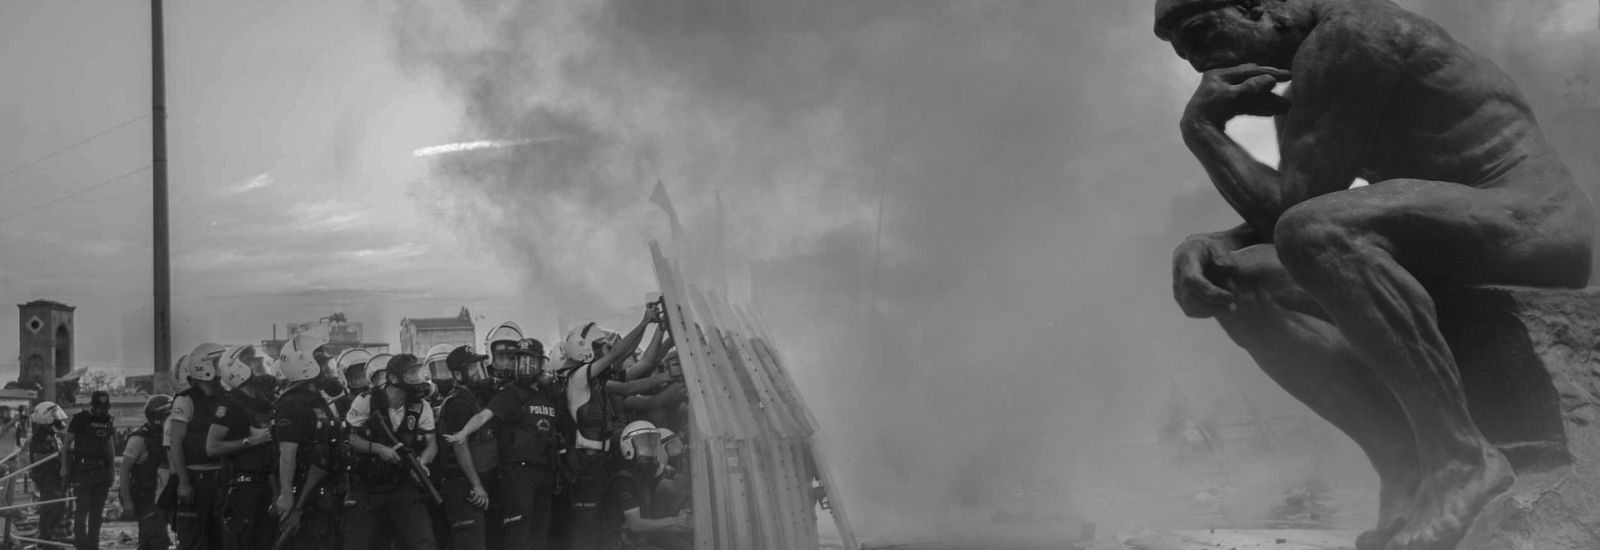 group of people in front of large statue surrounded by smoke